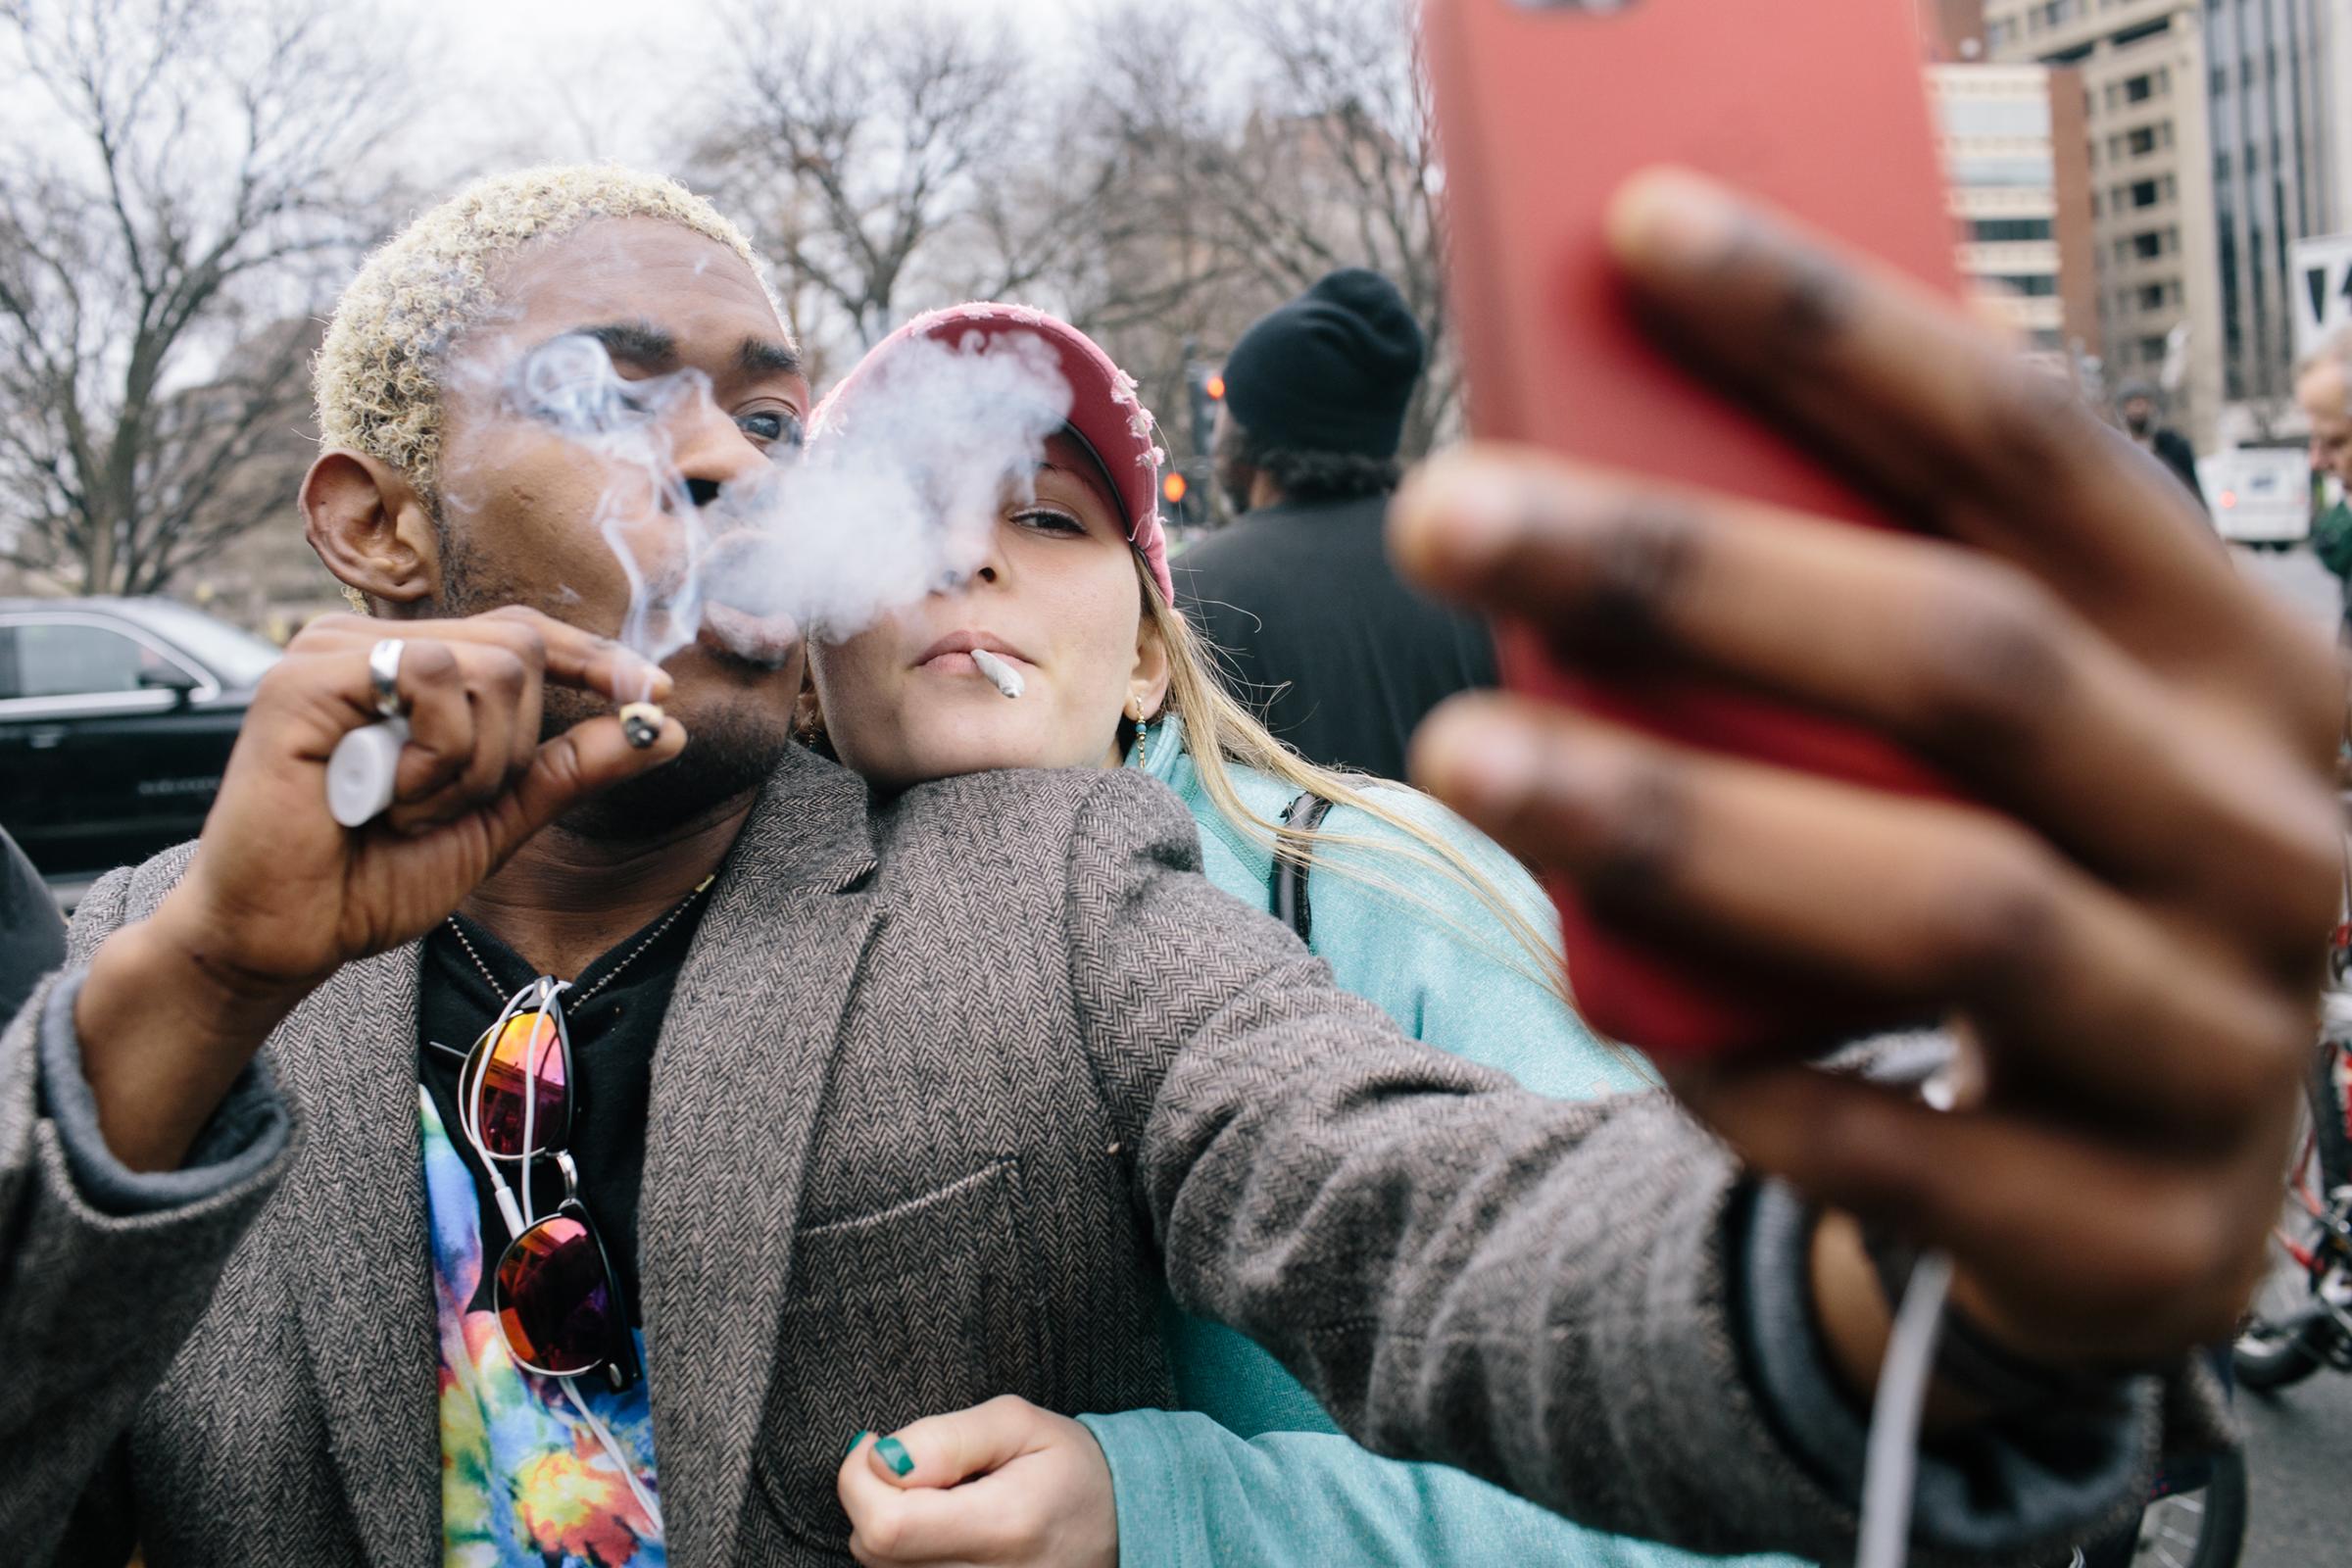 Giovanni Gopaulsingh, 25, from Maryland, and Ariel Johnson, 25, from Washington, D.C., smoke joints as they take a selfie during #Trump420 on Friday morning in Washington, D.C. An estimated 10,000 people showed up to receive a free joint given away by DCMJ near Dupont Circle on Inauguration Day, January 20, 2017 in Washington, D.C. The event was put on to bring awareness to marijuana reform.